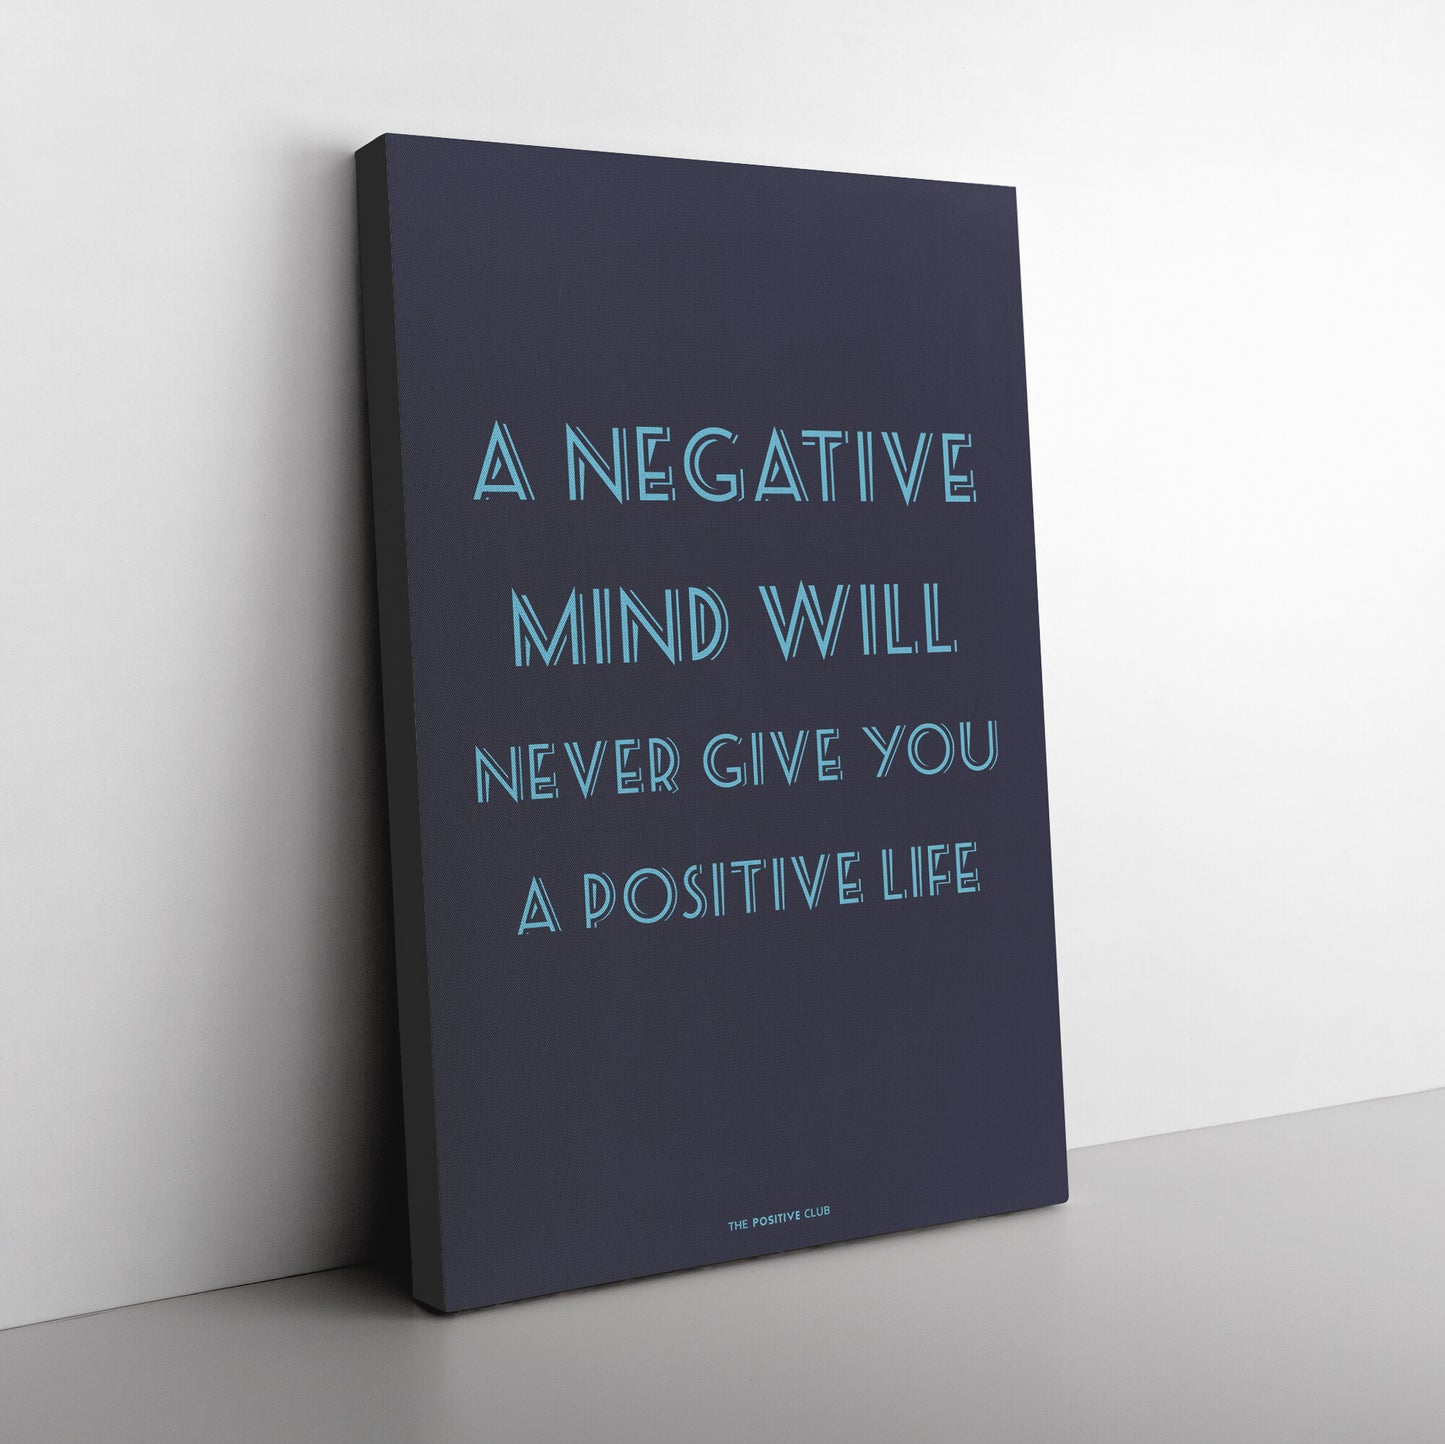 A NEGATIVE MIND WILL NEVER GIVE YOU A POSITIVE LIFE